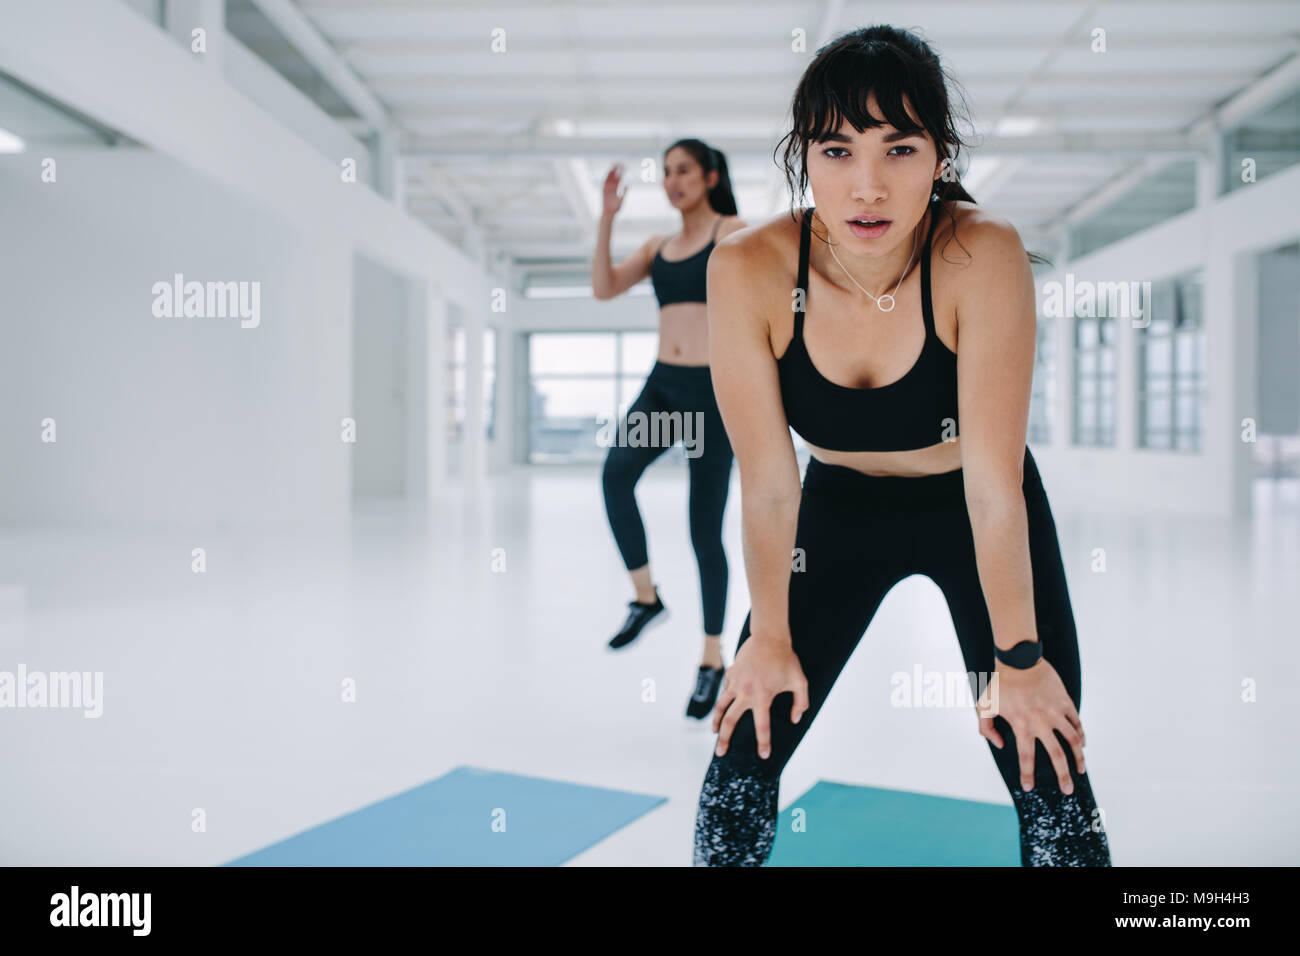 Sportswoman in bent forward pose with hands on knees and female friends exercising in background. Woman taking break in exercise class in gym. Stock Photo